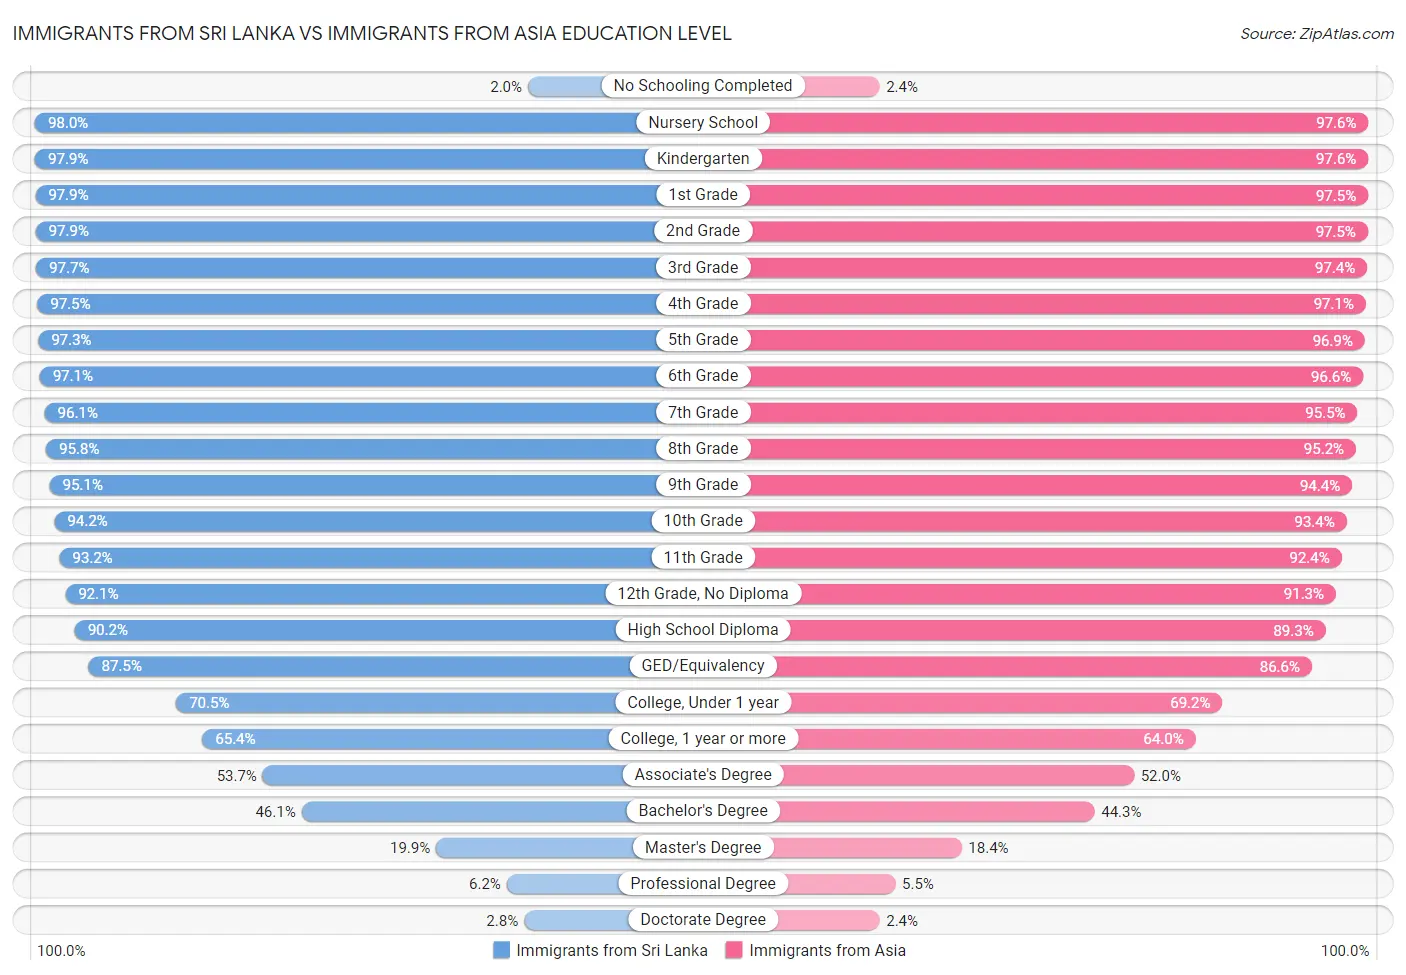 Immigrants from Sri Lanka vs Immigrants from Asia Education Level